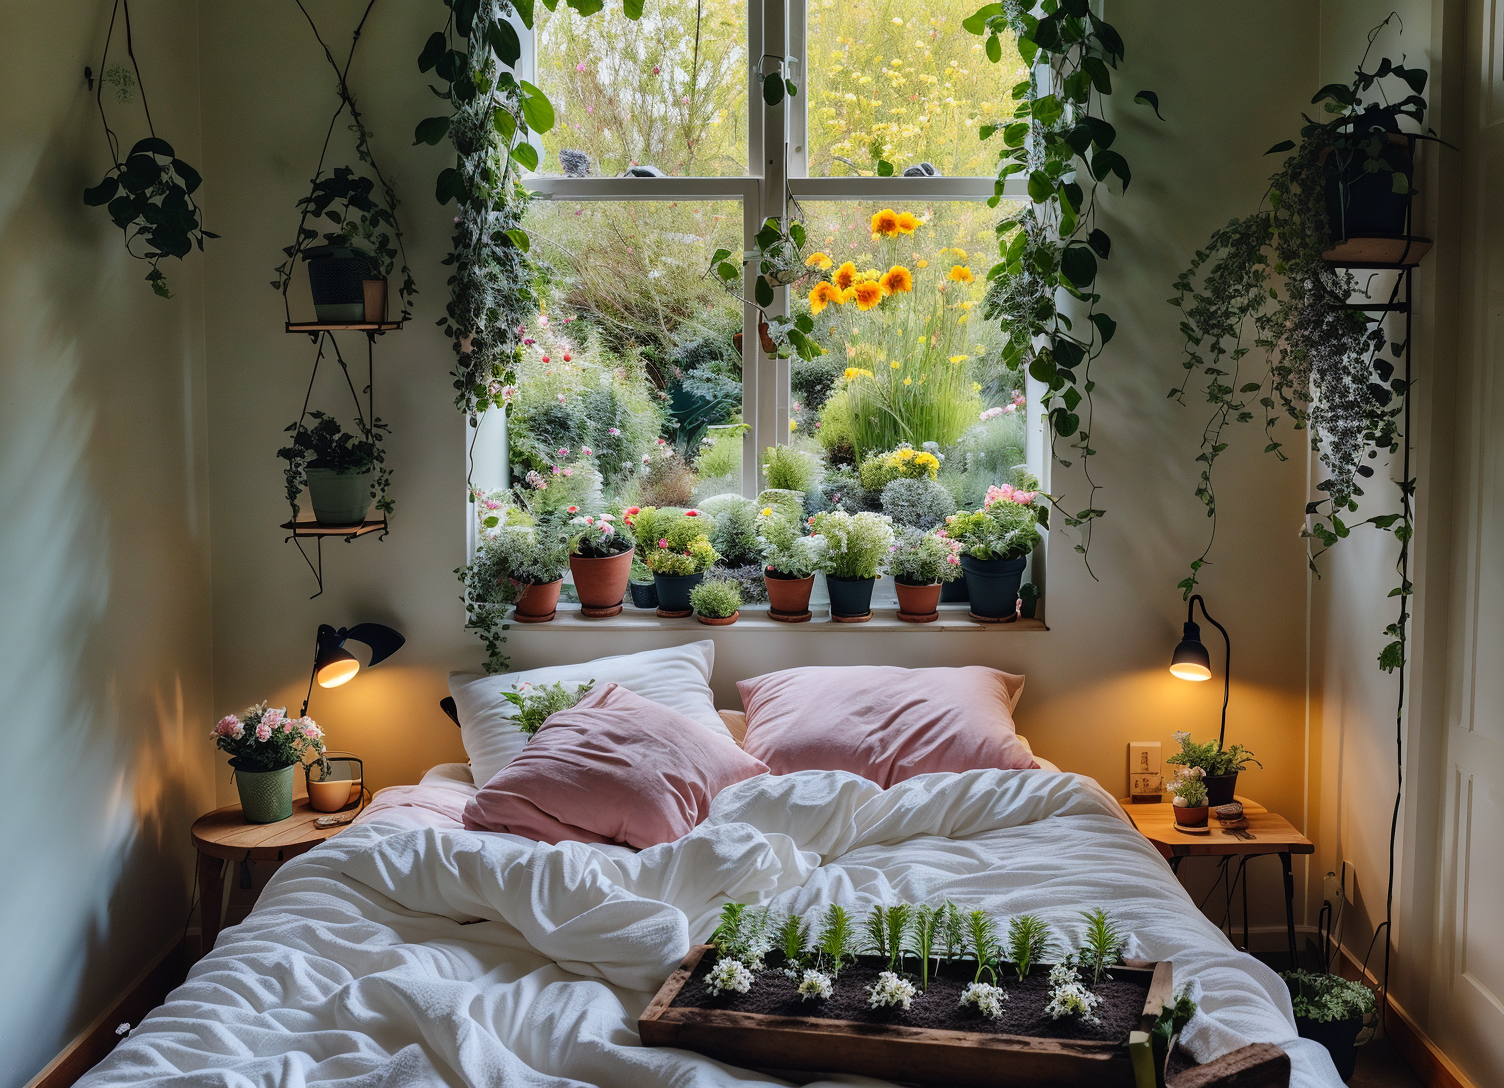 (photo:1.2) of a (cozy:1.2) upscale (spring gardenism:1.2) bedroom